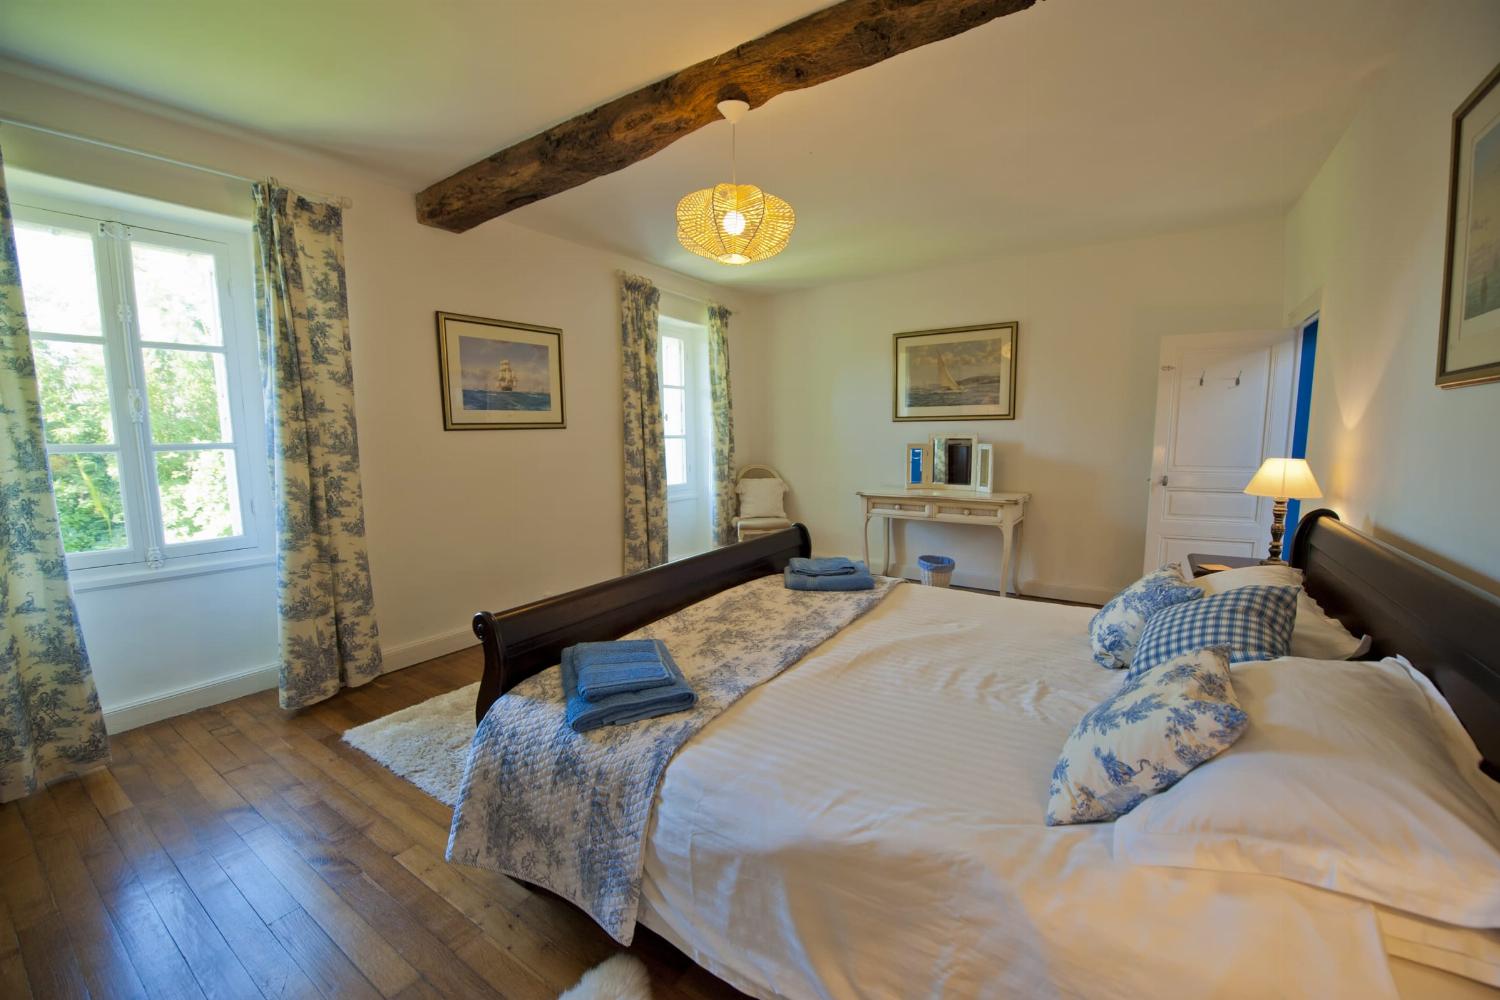 Bedroom | Rental accommodation in Charente